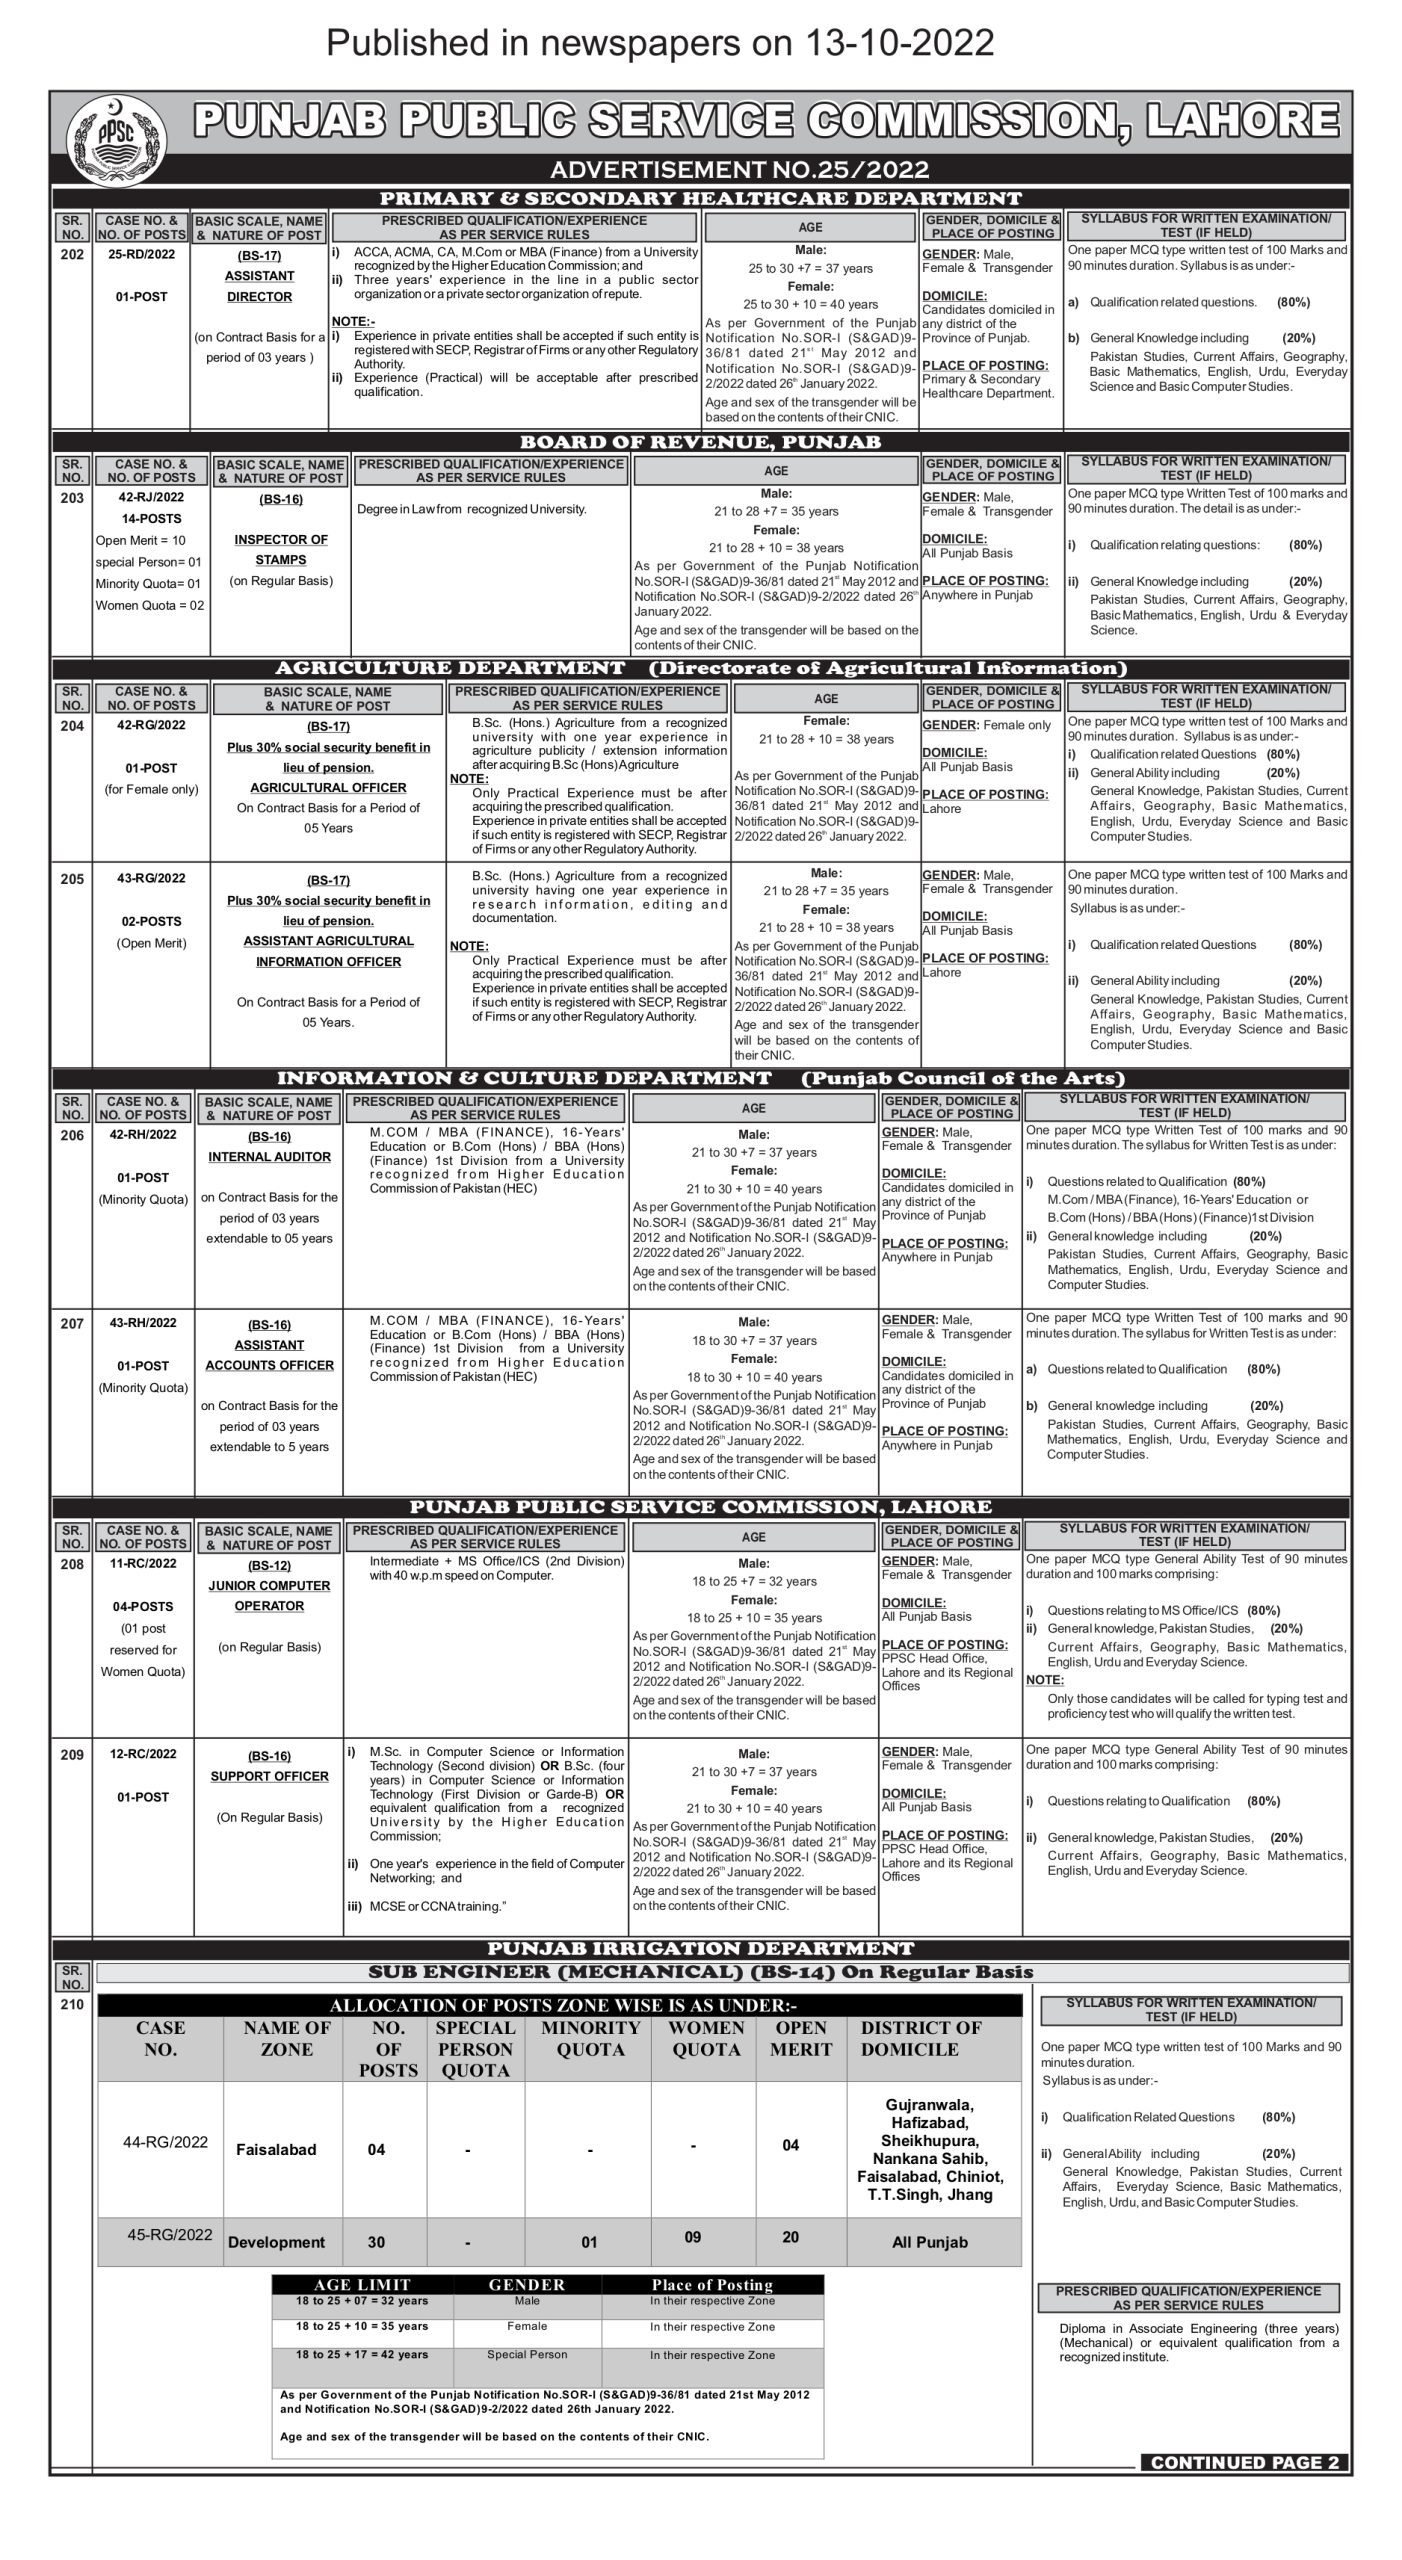 PPSC Jobs 2023 Online Apply Complete Process for Application Form